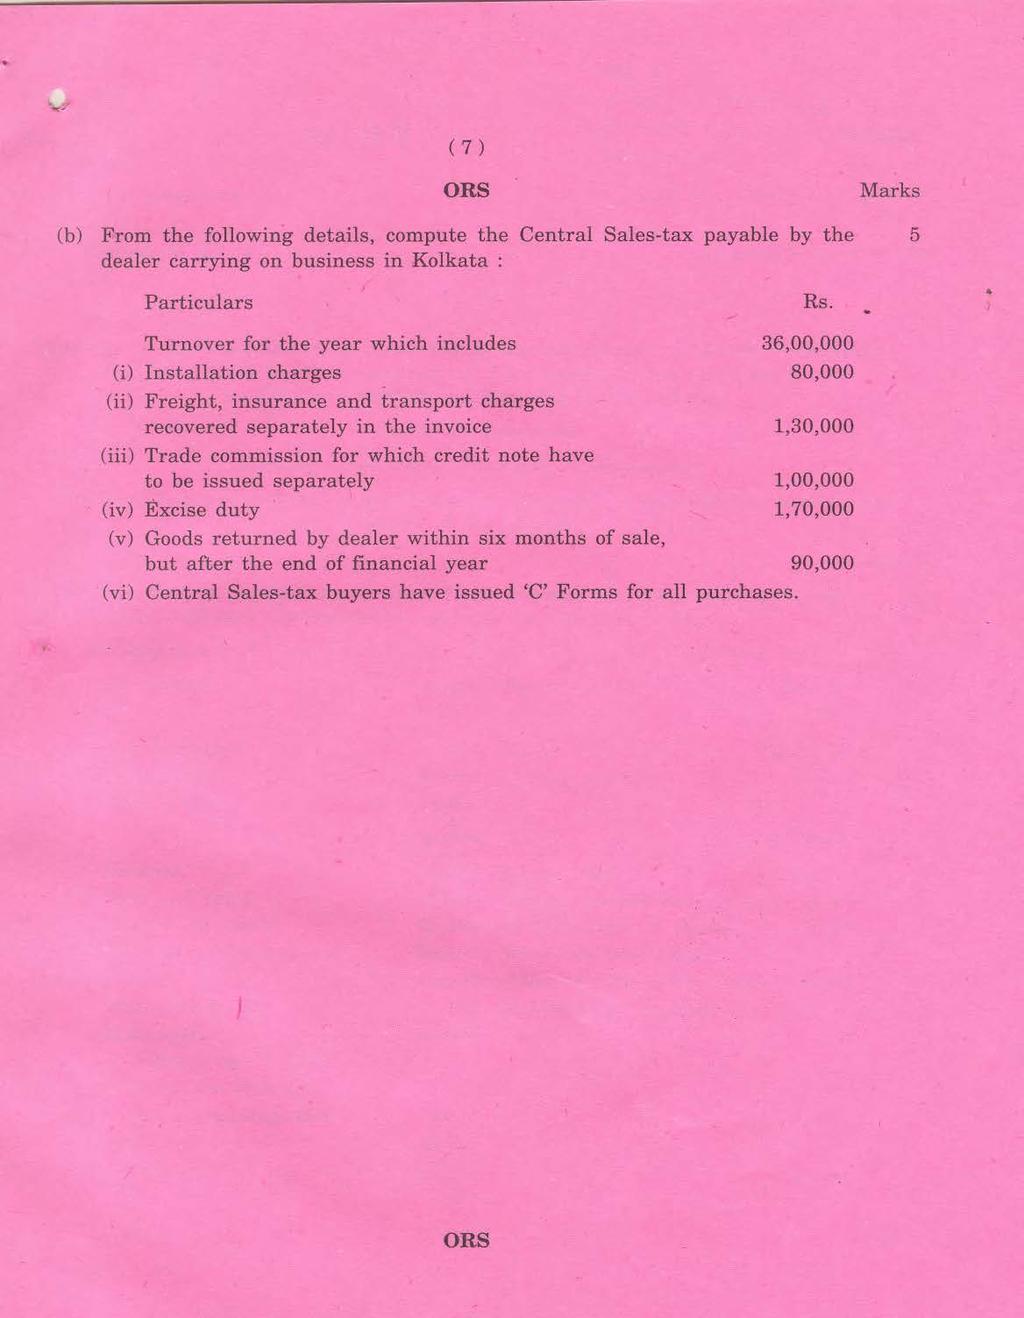 "" v (7 ) (b) From the following details, compute the Central Sales-tax payable by the dealer carrying on business in Kolkata : Rs ~ Turnover for the year which includes 36,00,000 (i) Installation